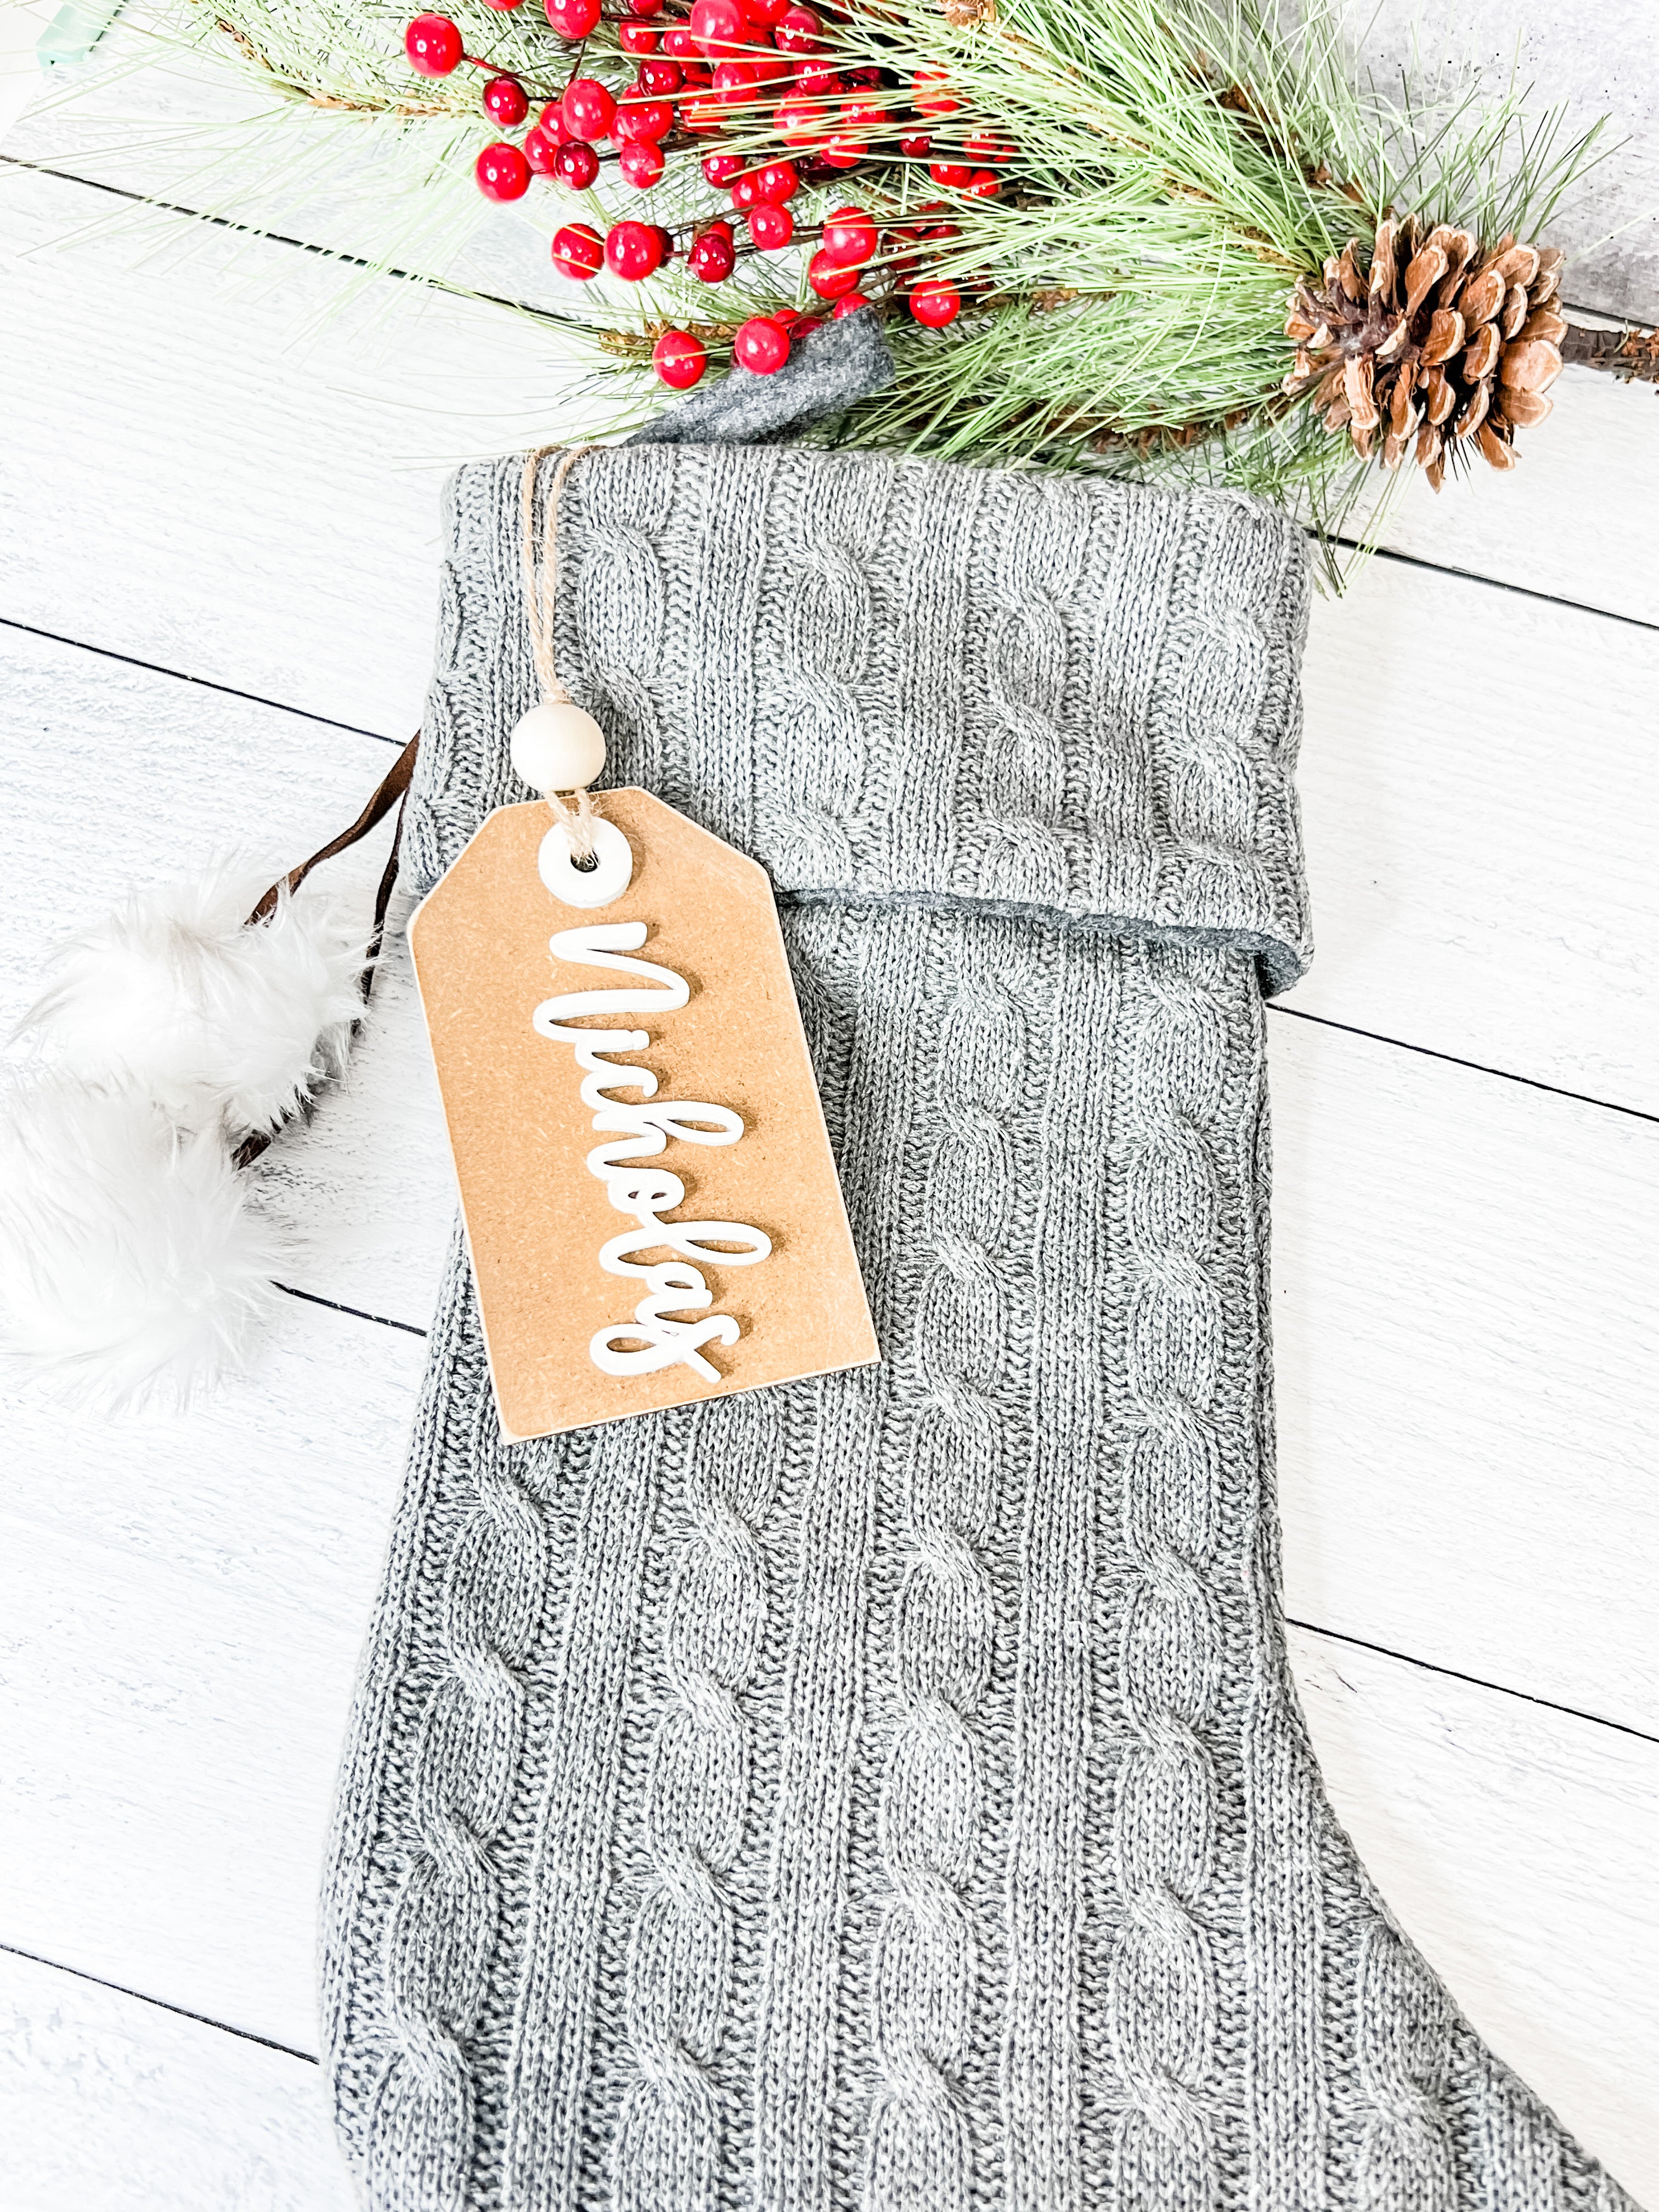 Christmas Stocking Tags / Stocking Wooden Words / Stocking Names